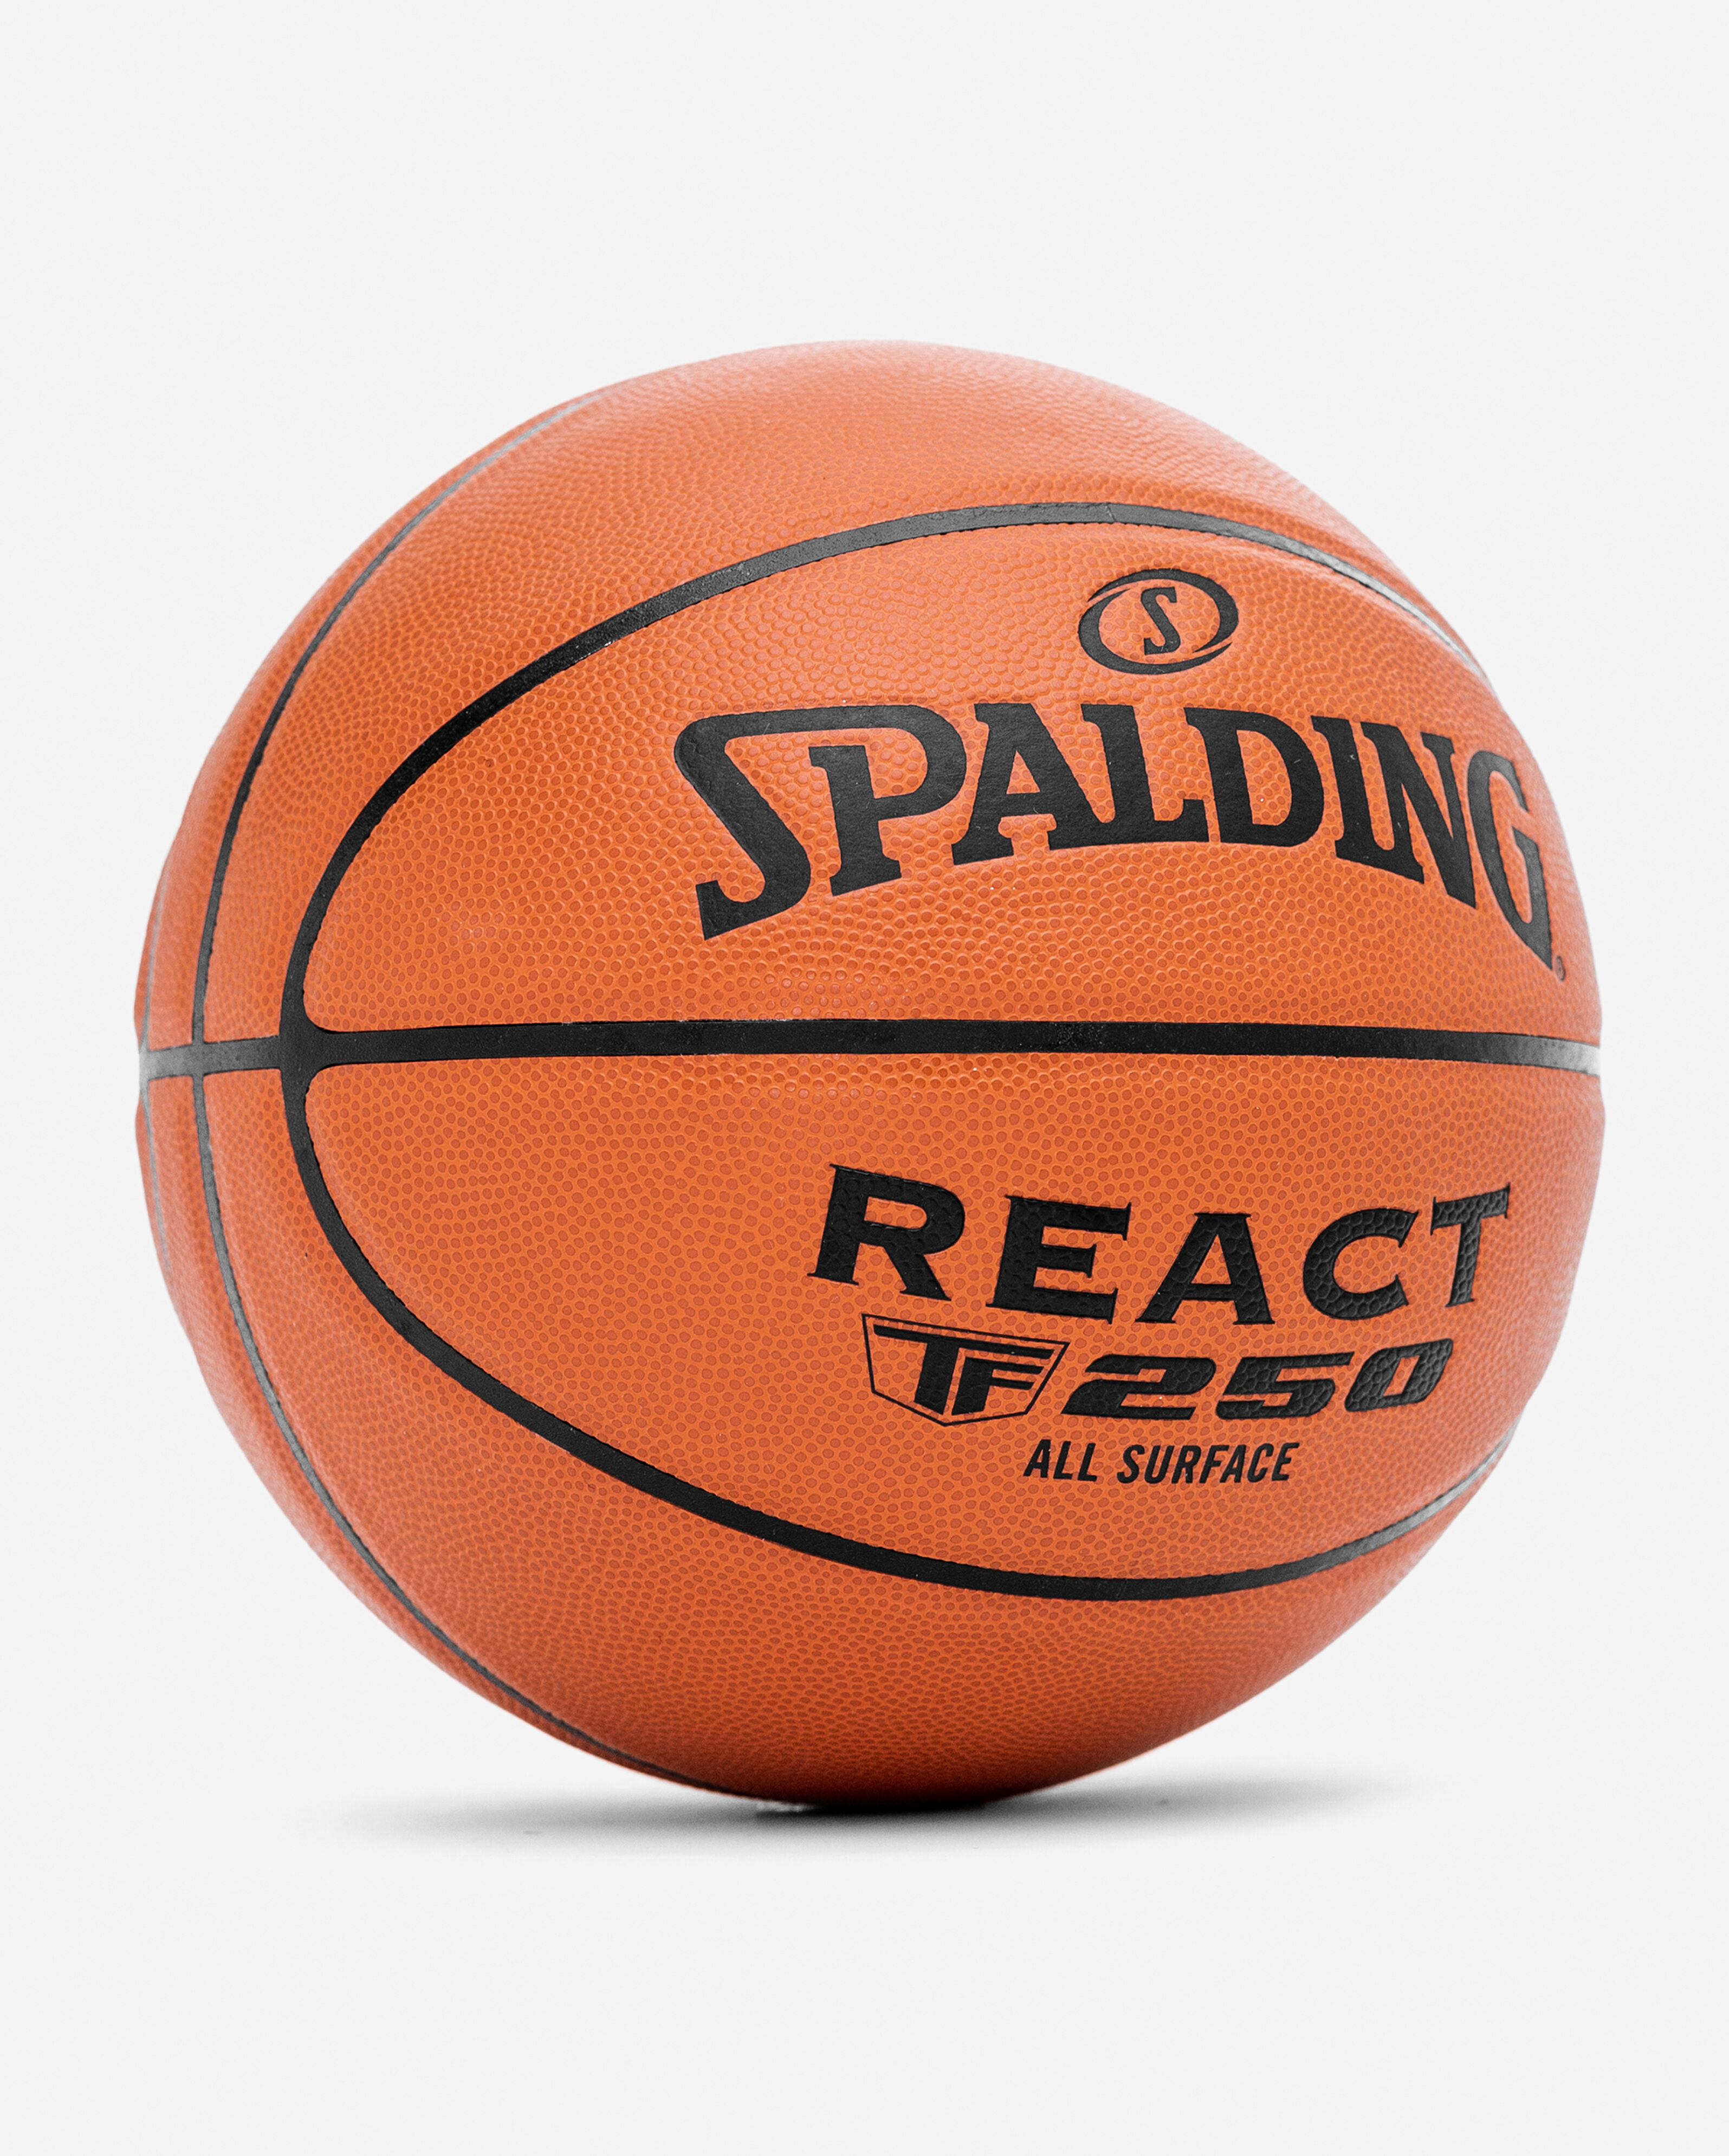 Spalding TF-250 Basketball Suitable For Indoor or Outdoor Use Intermediate,28.5 